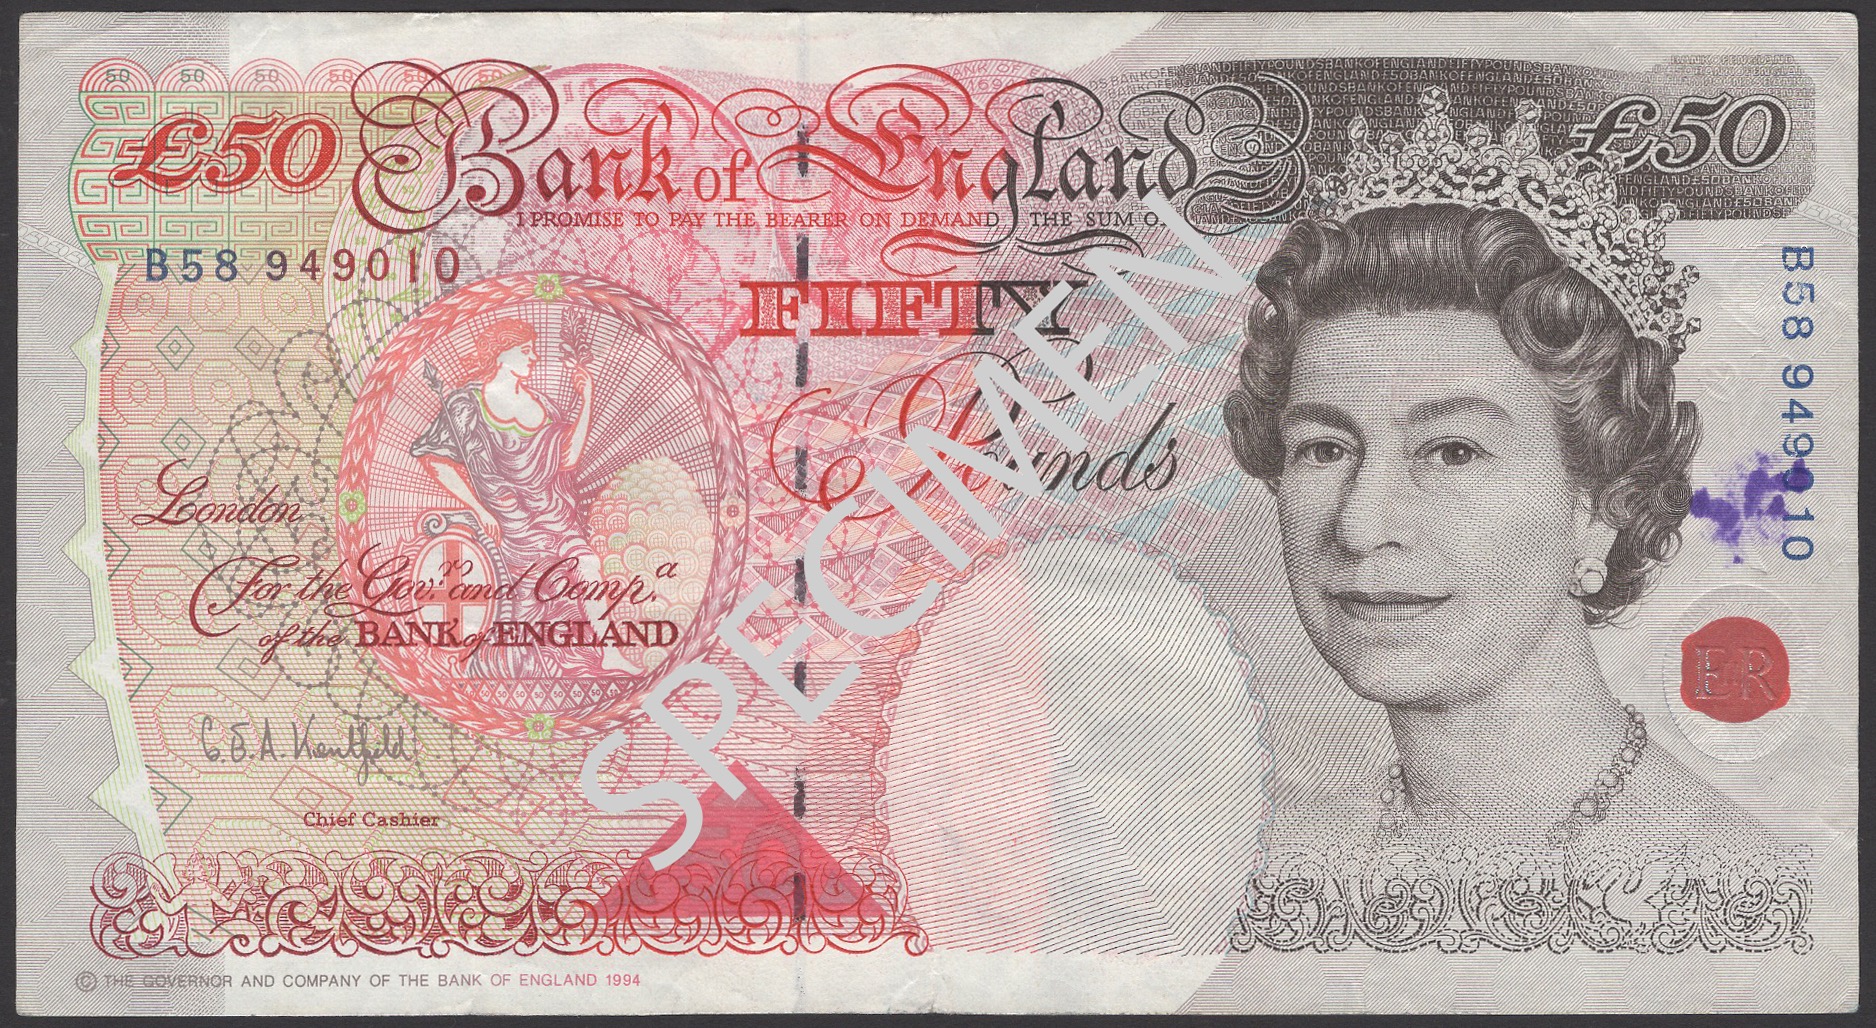 A Remarkable Collection of Bank of England Errors - Part Two